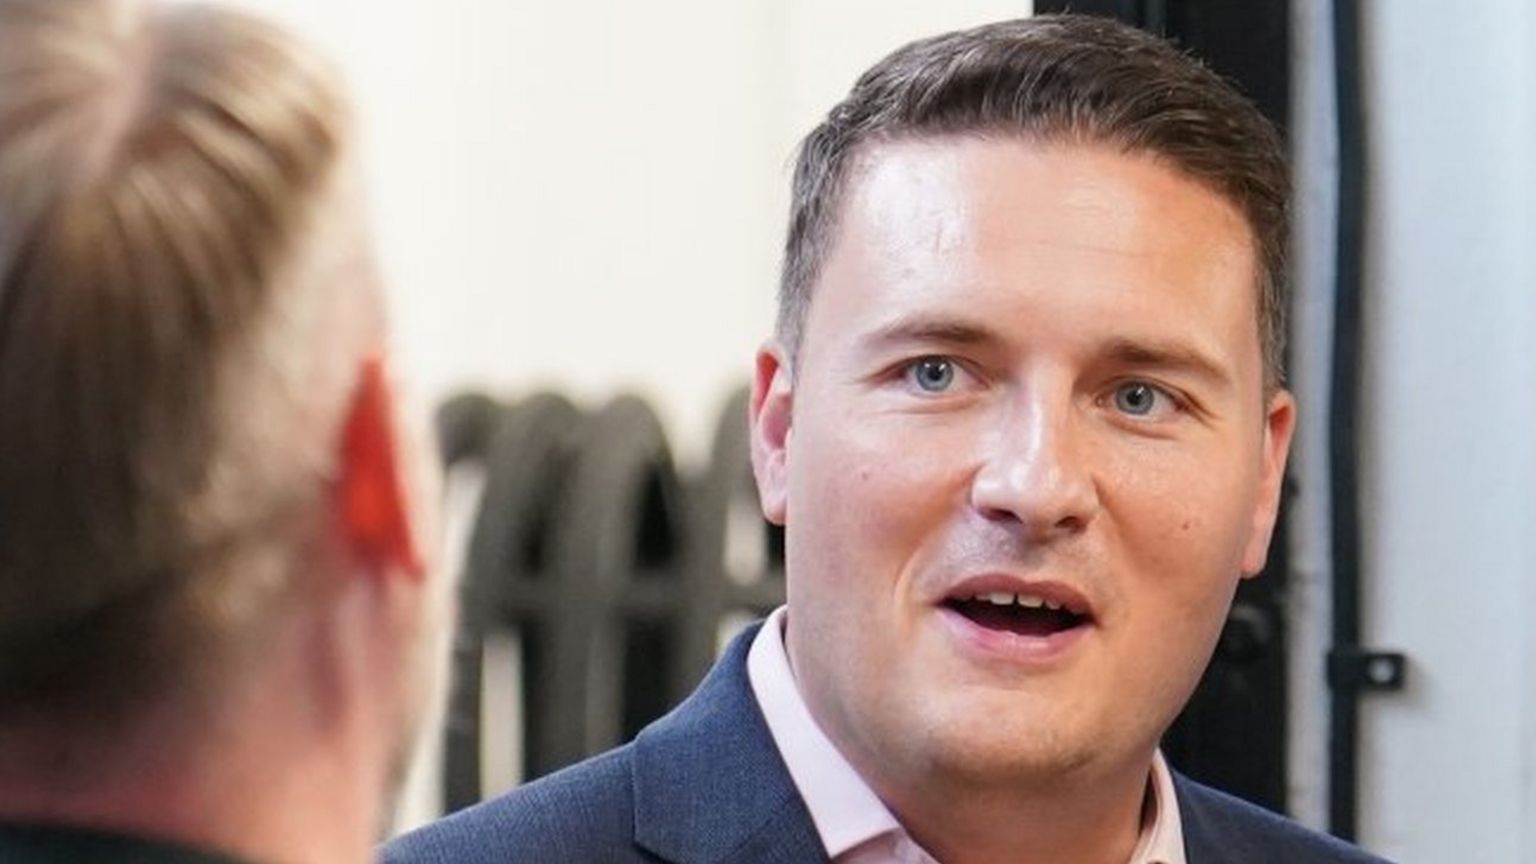 Labour Shadow Health and Social Care Secretary, Wes Streeting